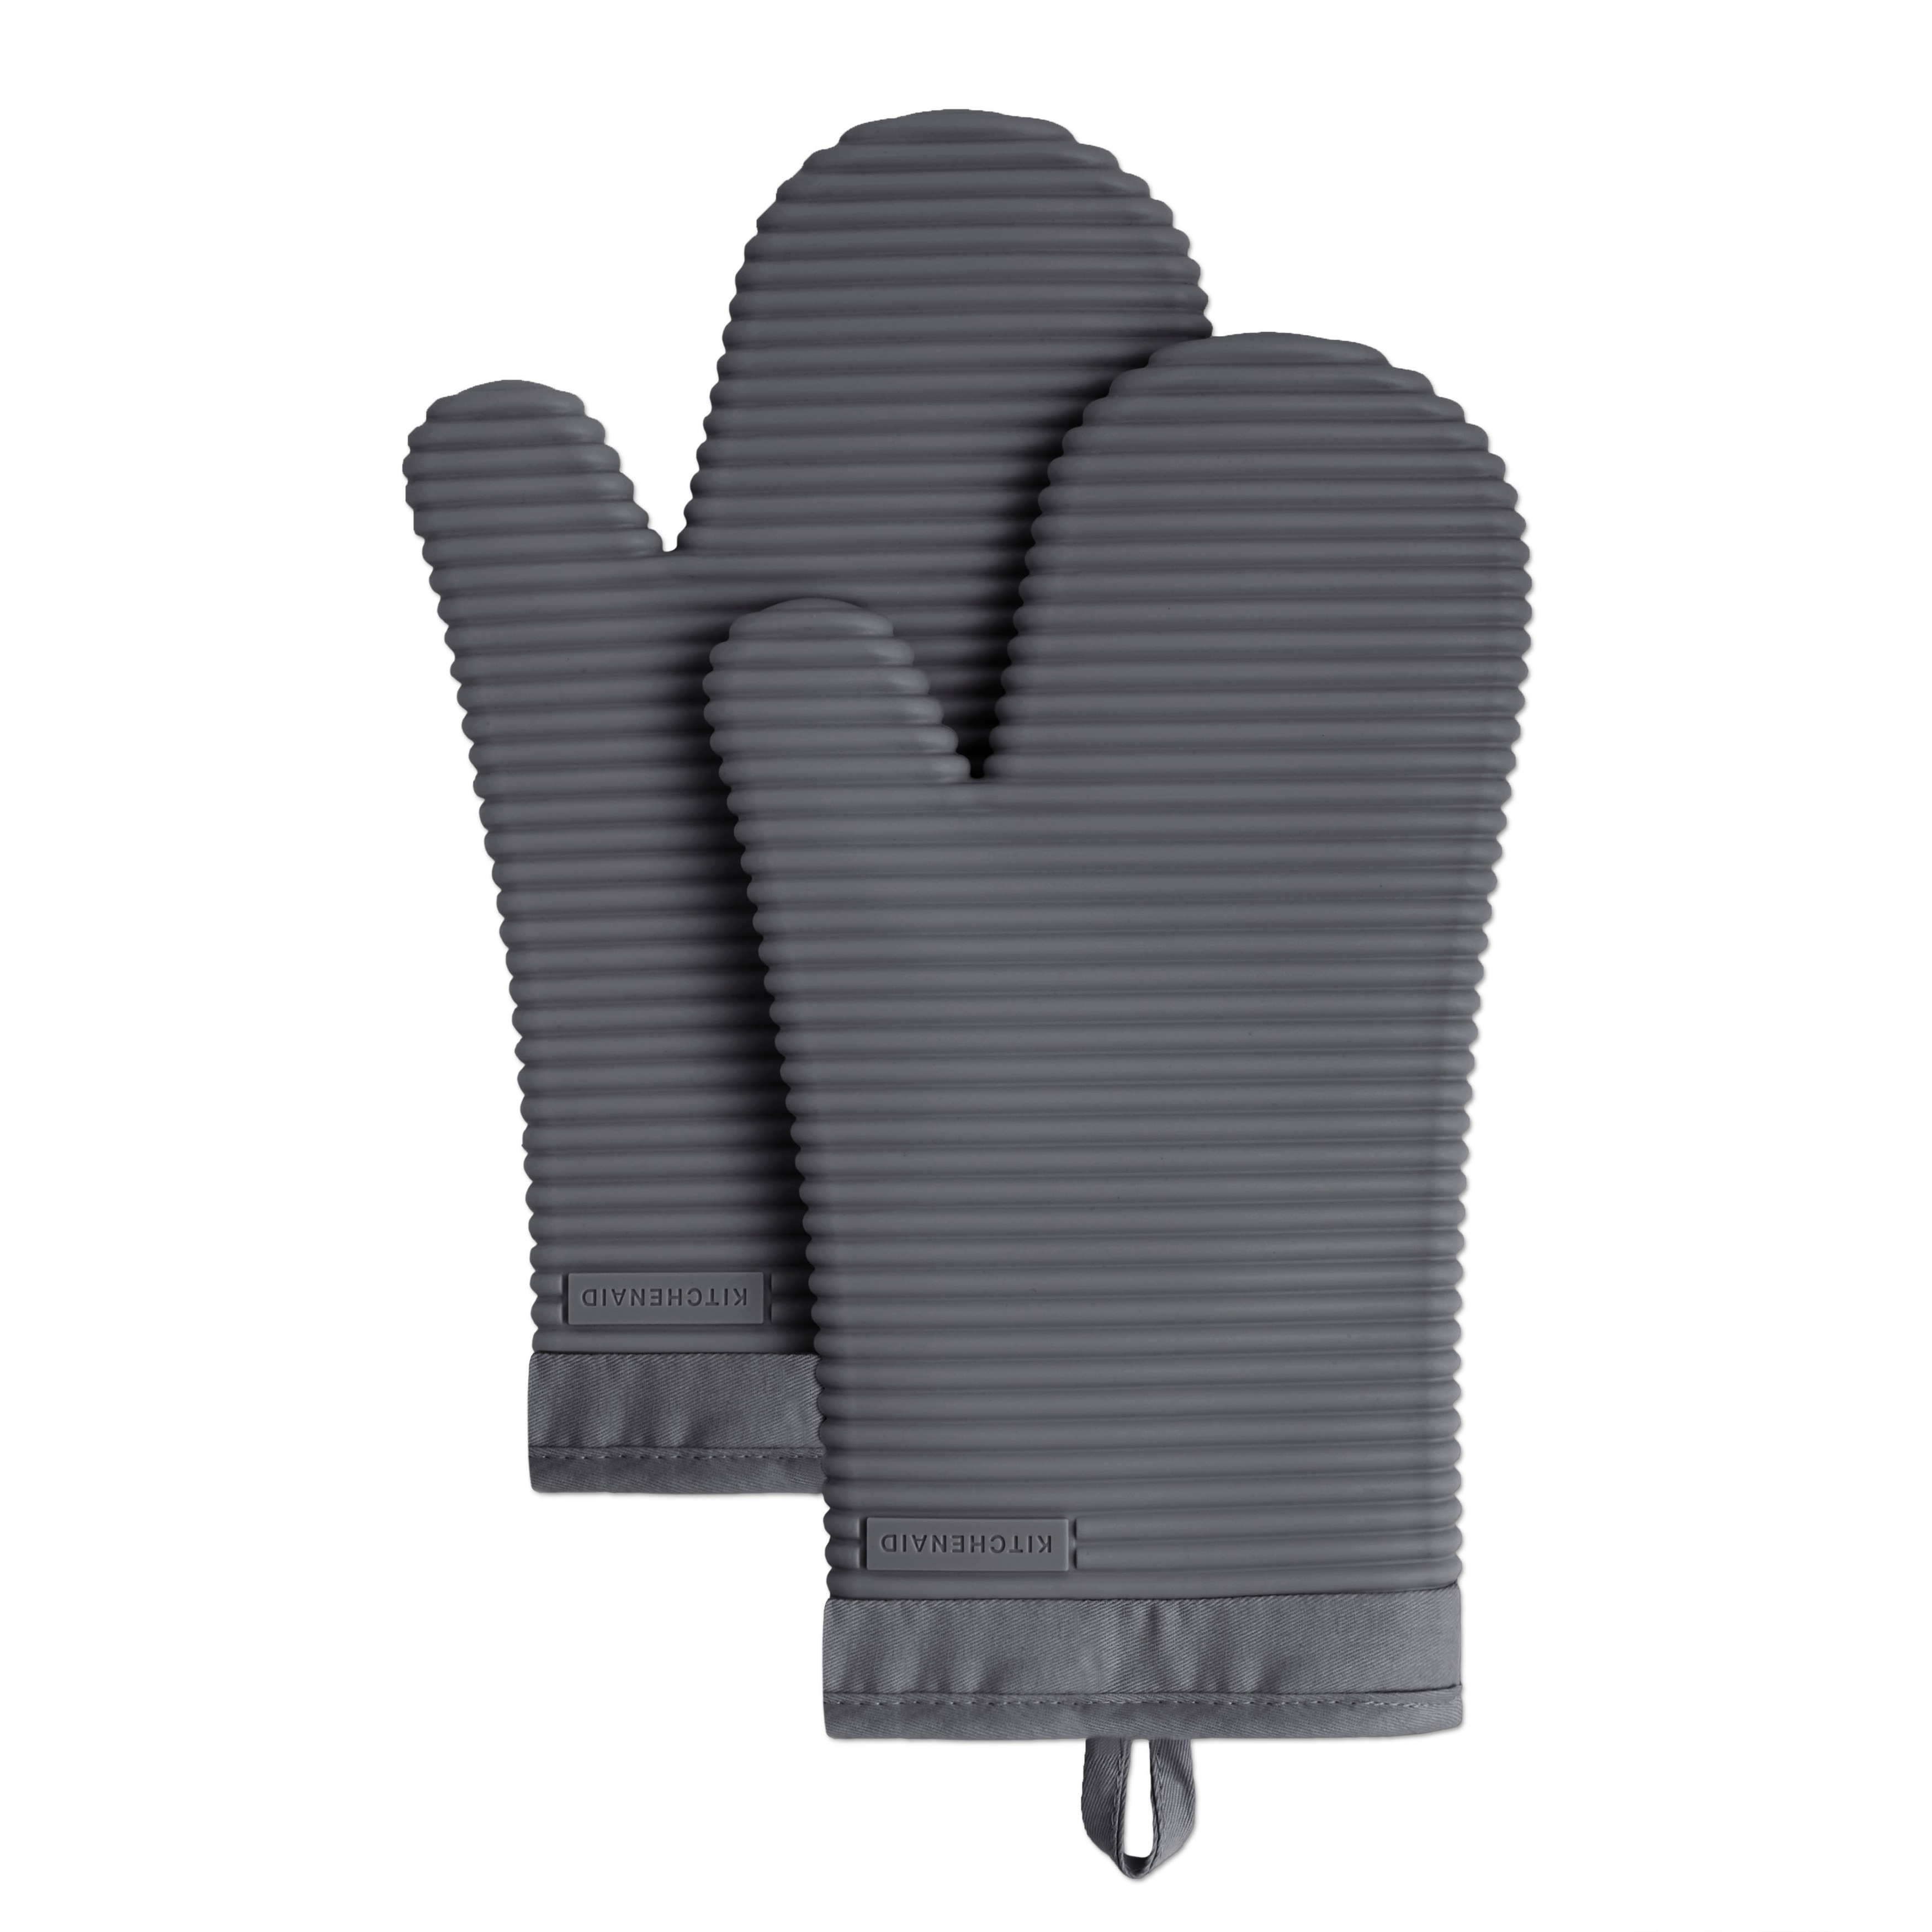 https://ak1.ostkcdn.com/images/products/is/images/direct/e1eb76941cfb7f5e7196348b7c44bb21a5ea1094/KitchenAid-Ribbed-Soft-Silicone-Oven-Mitt-Set%2C-7.5%22x13%22%2C-2-Pack.jpg